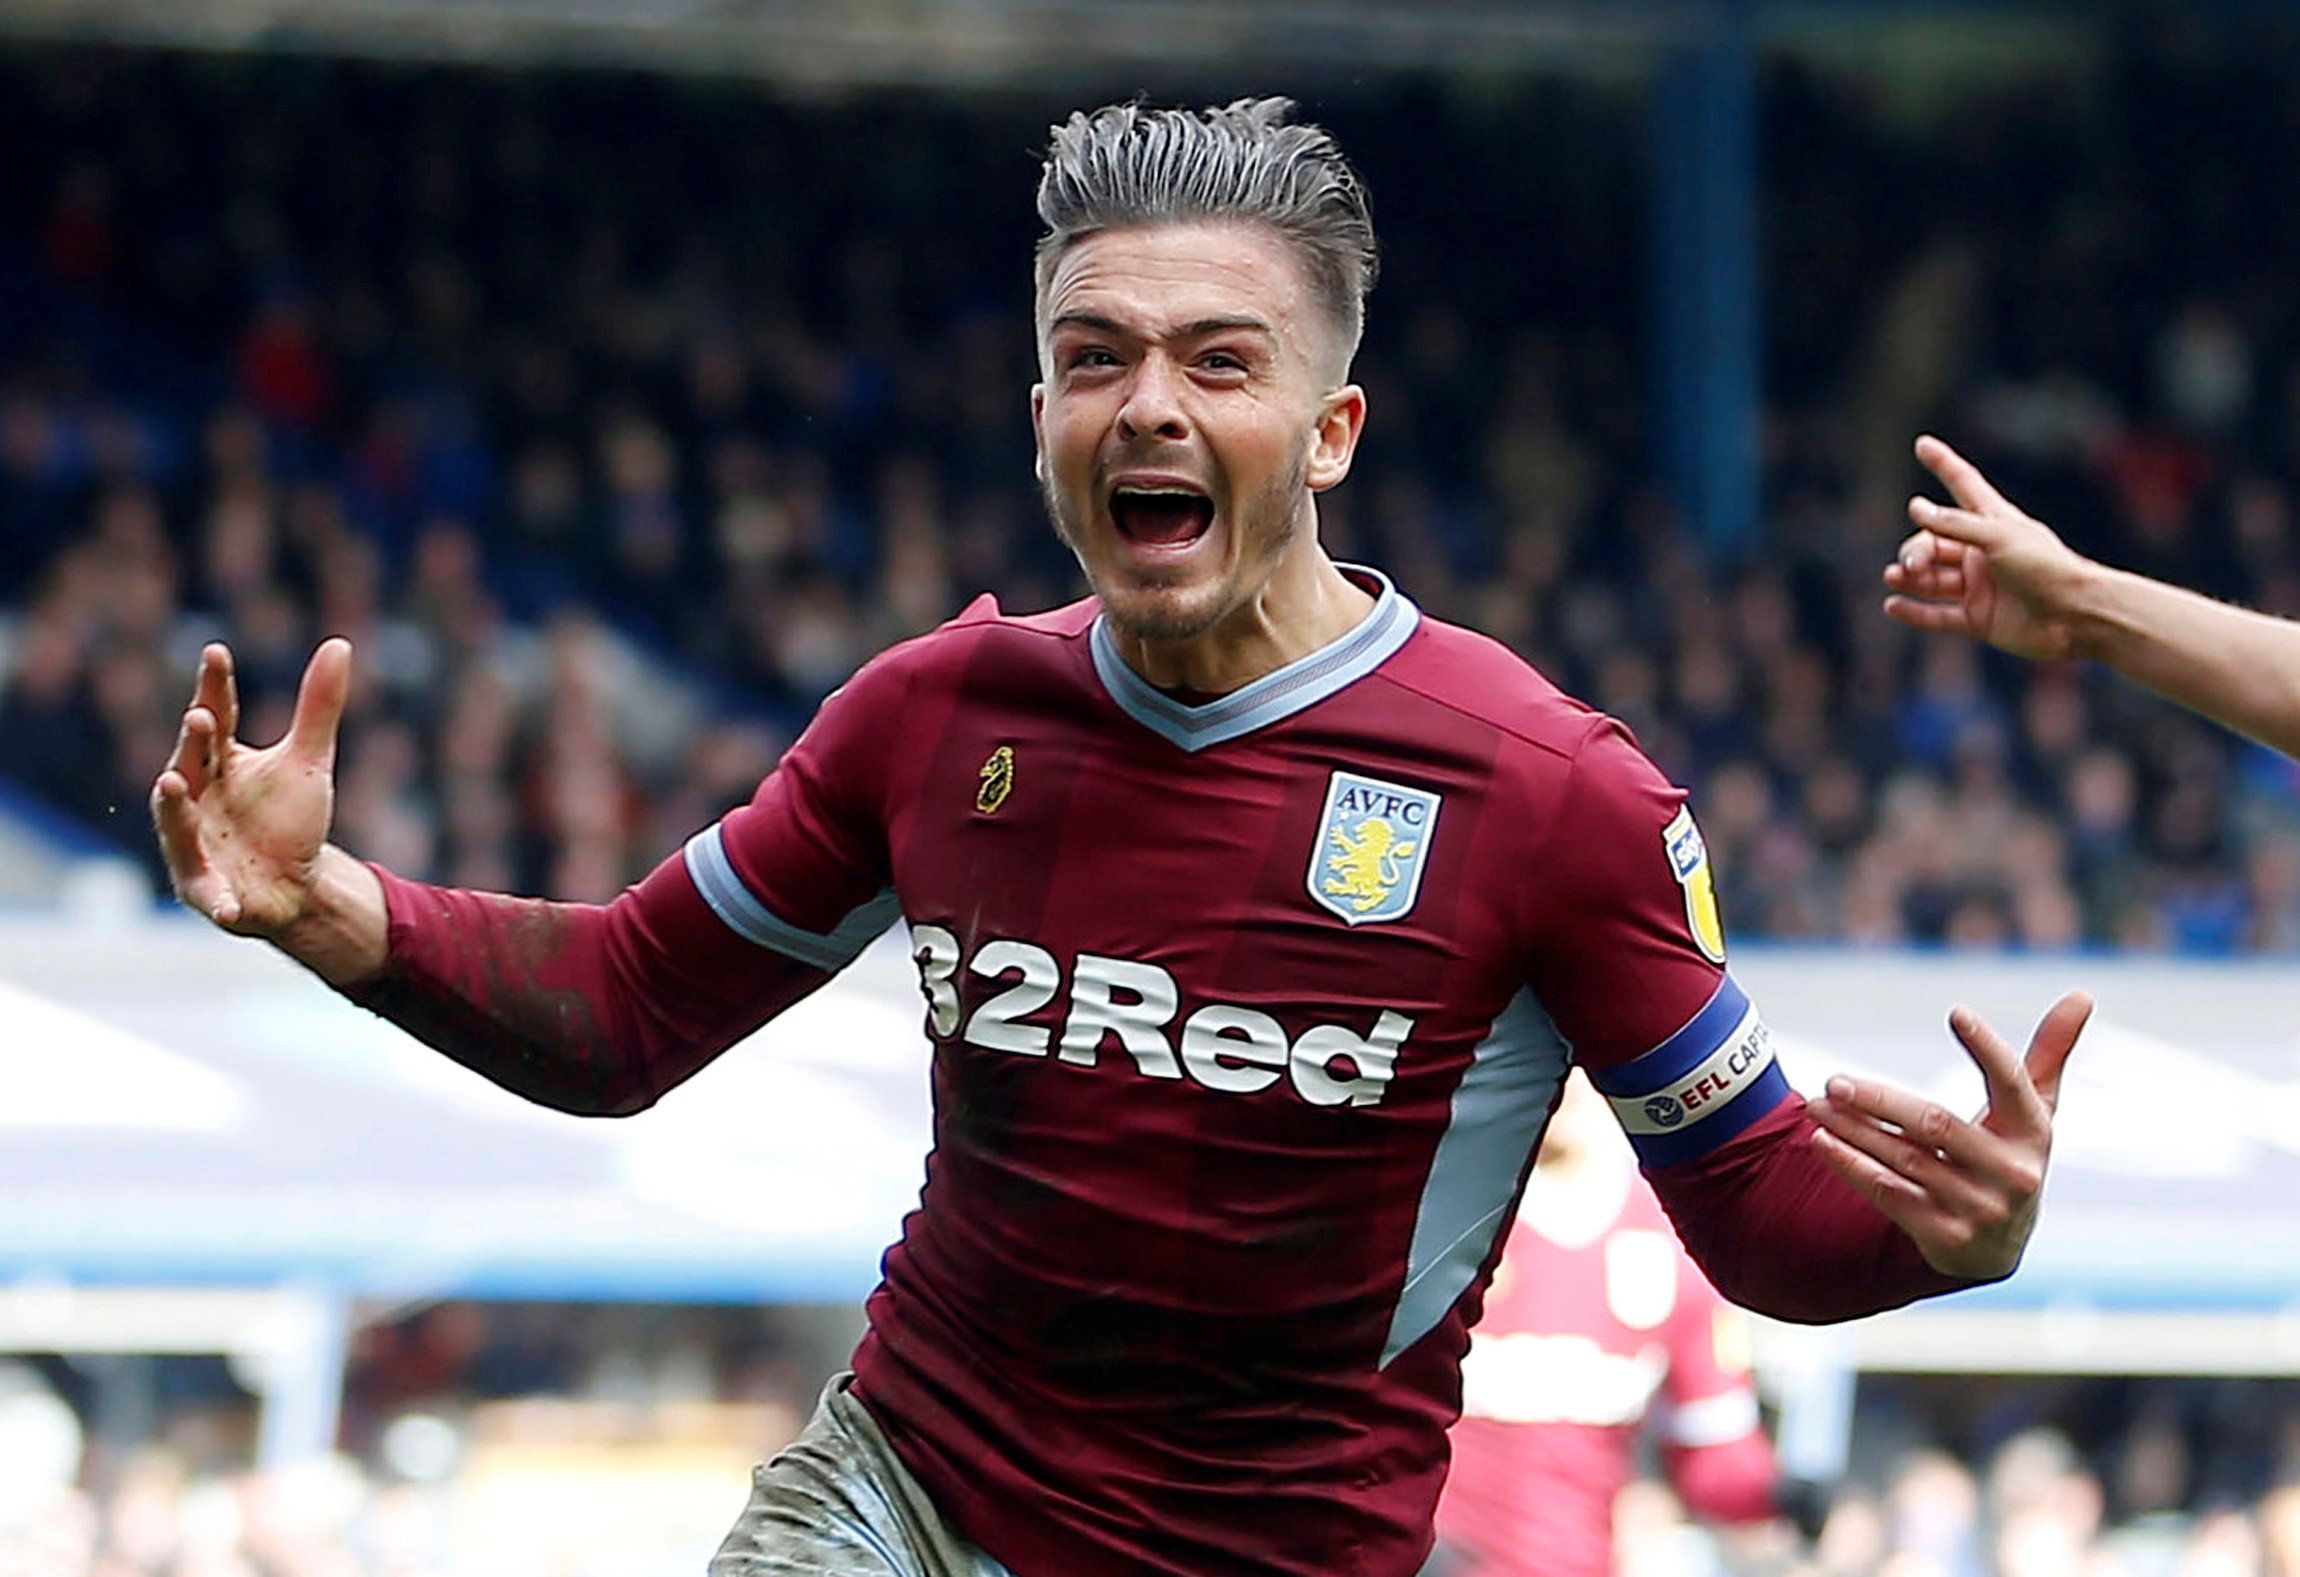 Soccer Football - Championship - Birmingham City v Aston Villa - St Andrew's, Birmingham, Britain - March 10, 2019   Aston Villa's Jack Grealish celebrates scoring their first goal    Action Images via Reuters/Craig Brough    EDITORIAL USE ONLY. No use with unauthorized audio, video, data, fixture lists, club/league logos or 